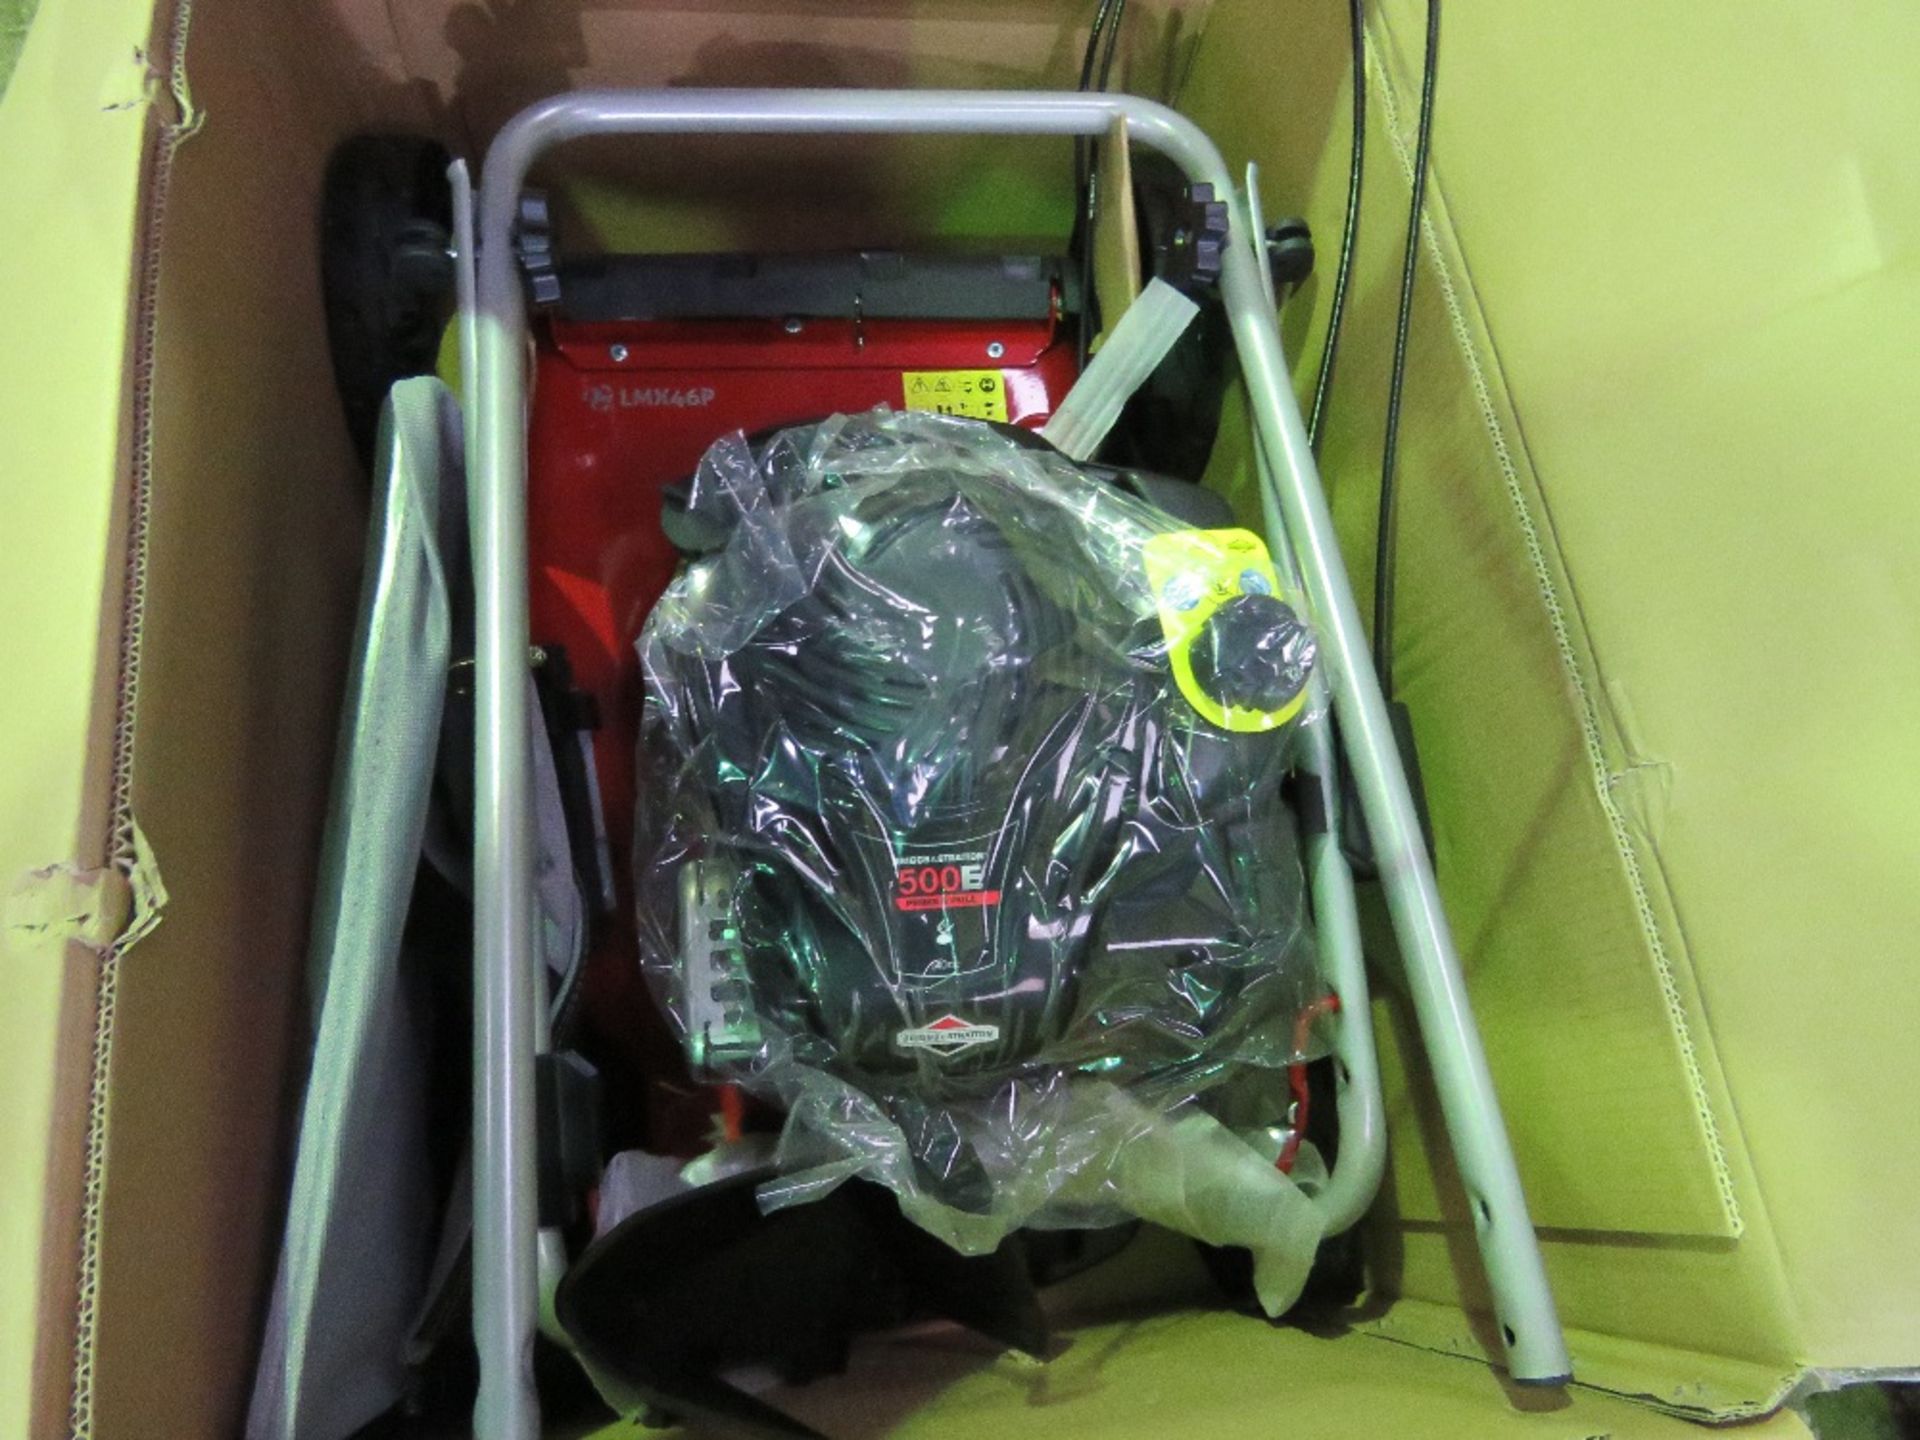 GARDENCARE LMX46 LAWNMOWER. BOXED, UNUSED, DIRECT FROM LOCAL COMPANY BEING SURPLUS STOCK. - Image 3 of 4